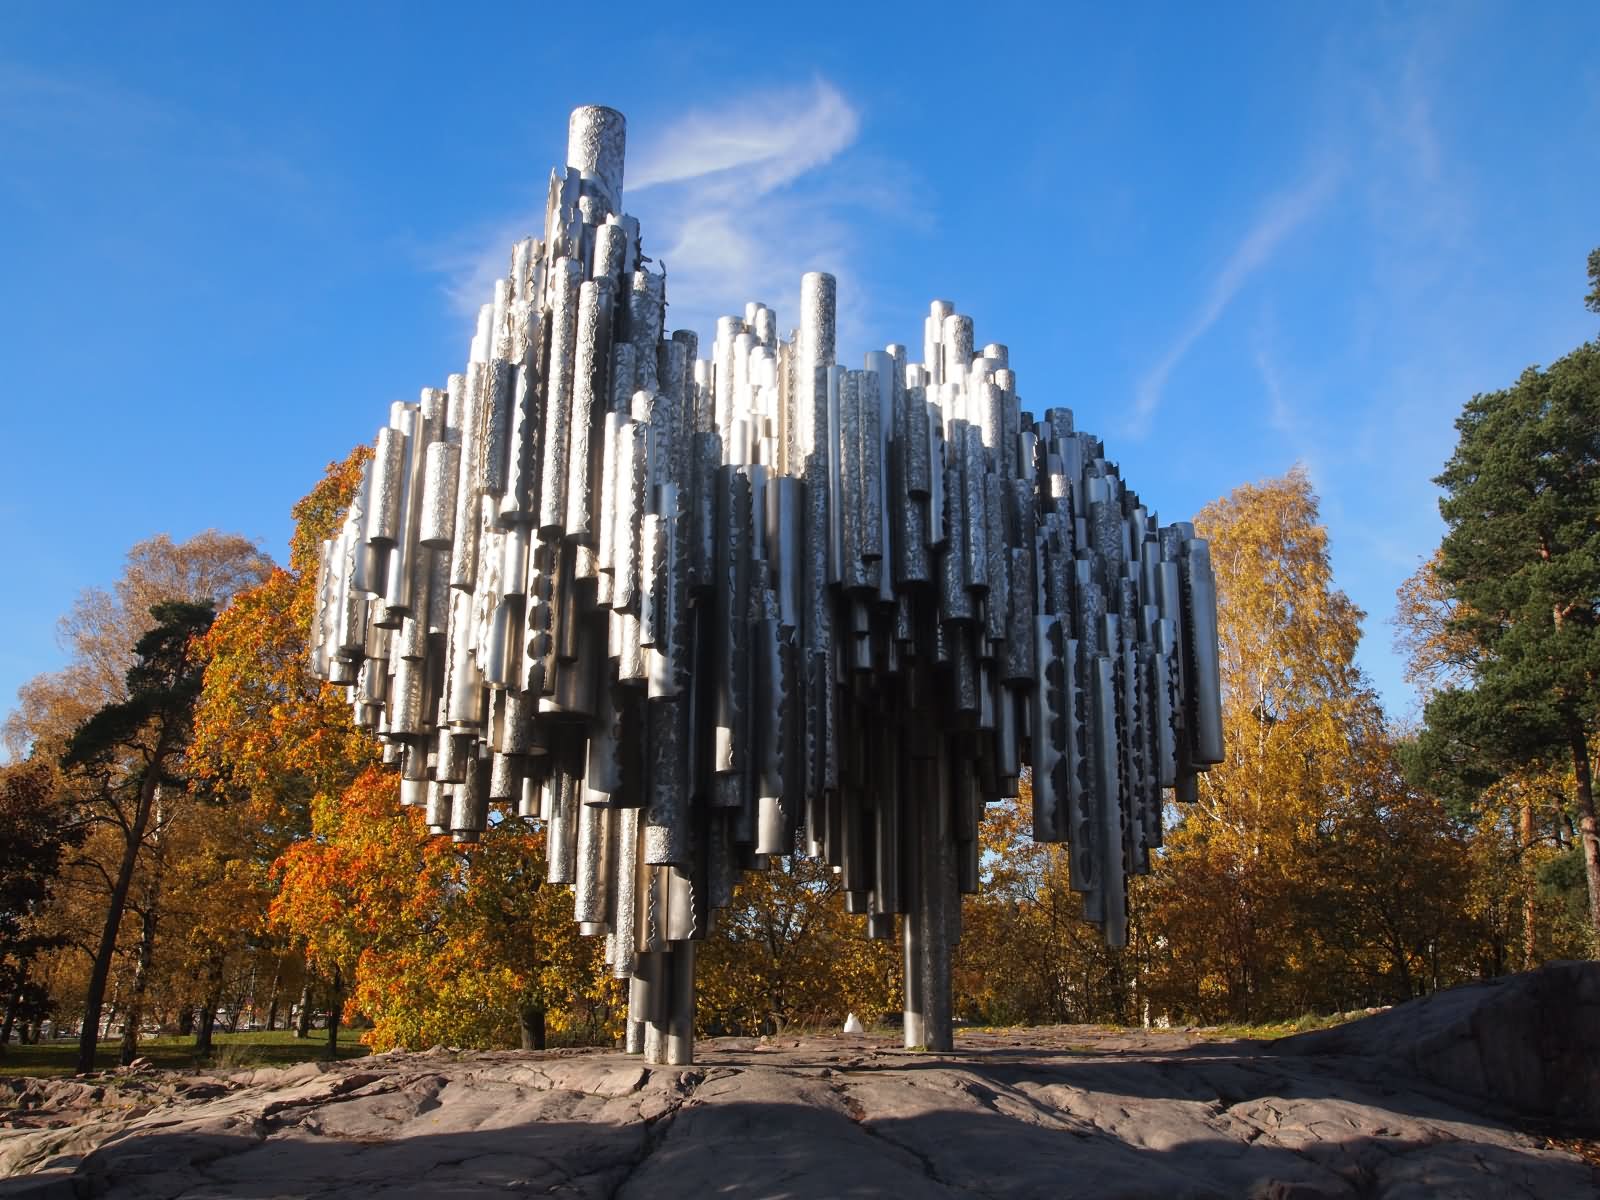 The Sibelius Monument View During Sunny Day